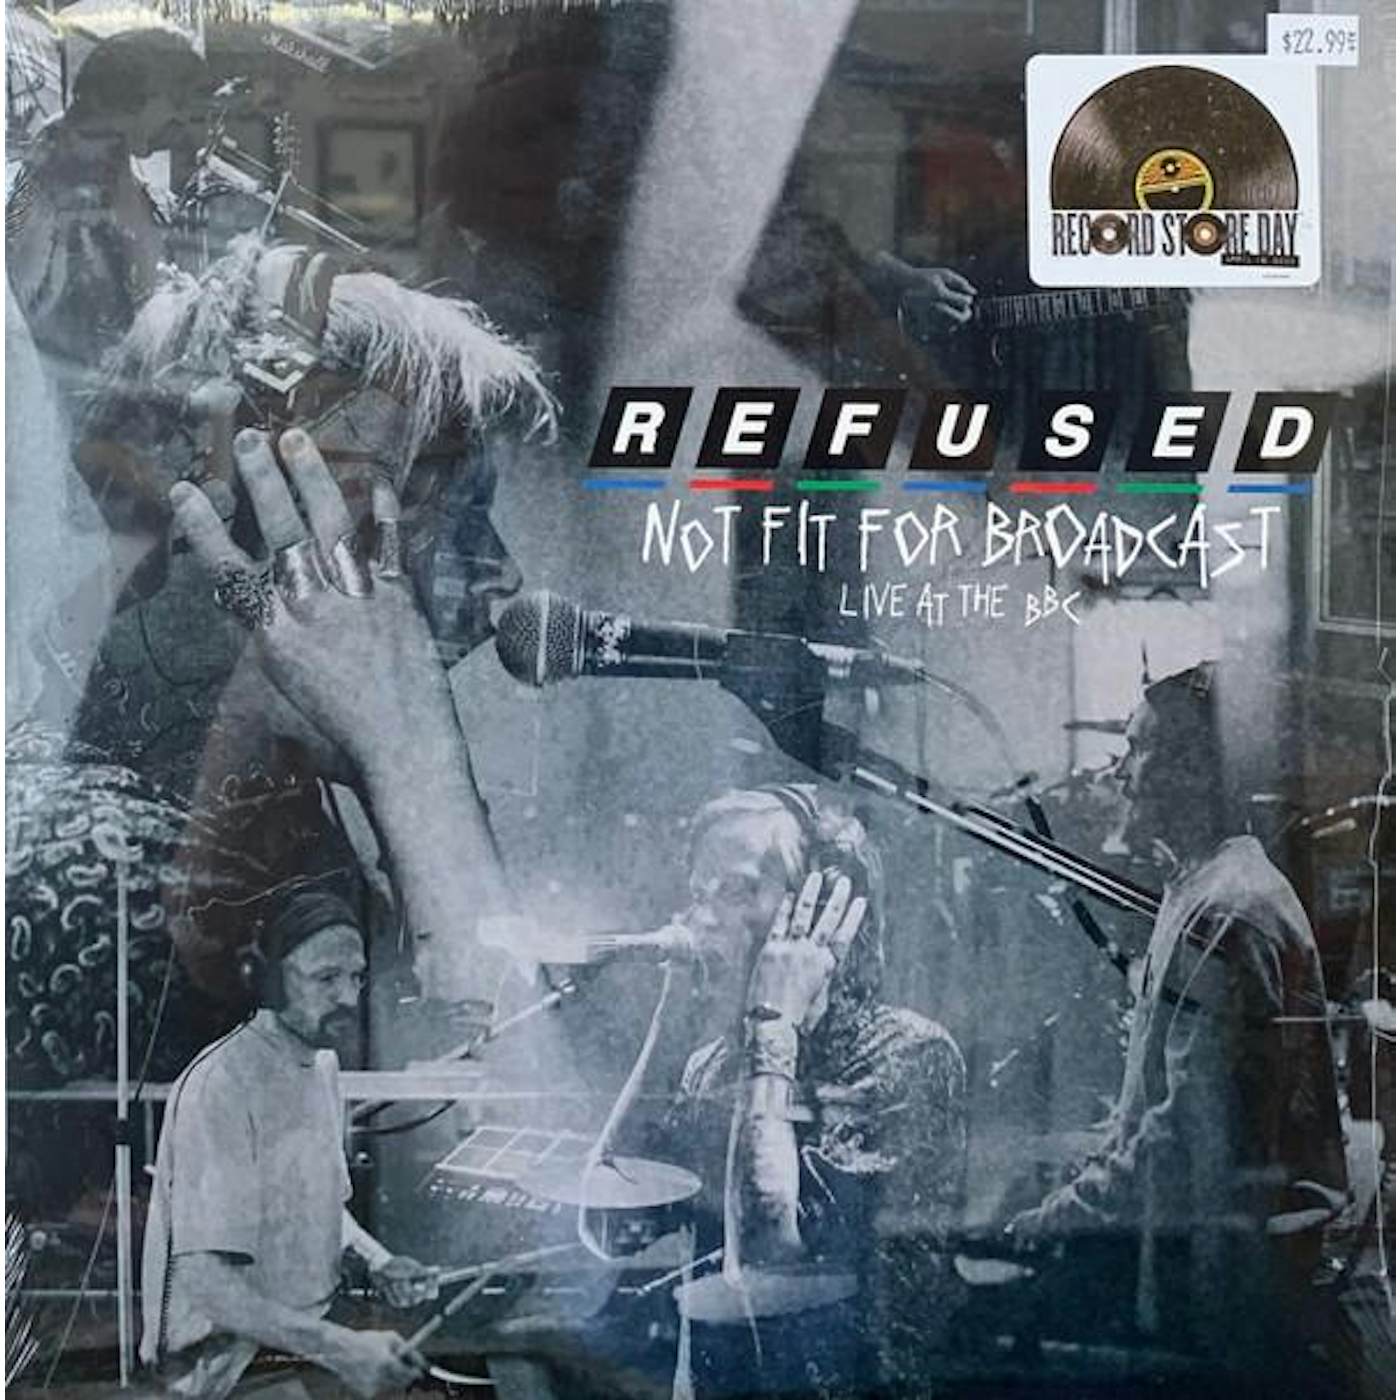 Refused NOT FIT FOR BROADCASTING - LIVE AT THE BBC (CRYSTAL CLEAR VINYL) (RSD) Vinyl Record